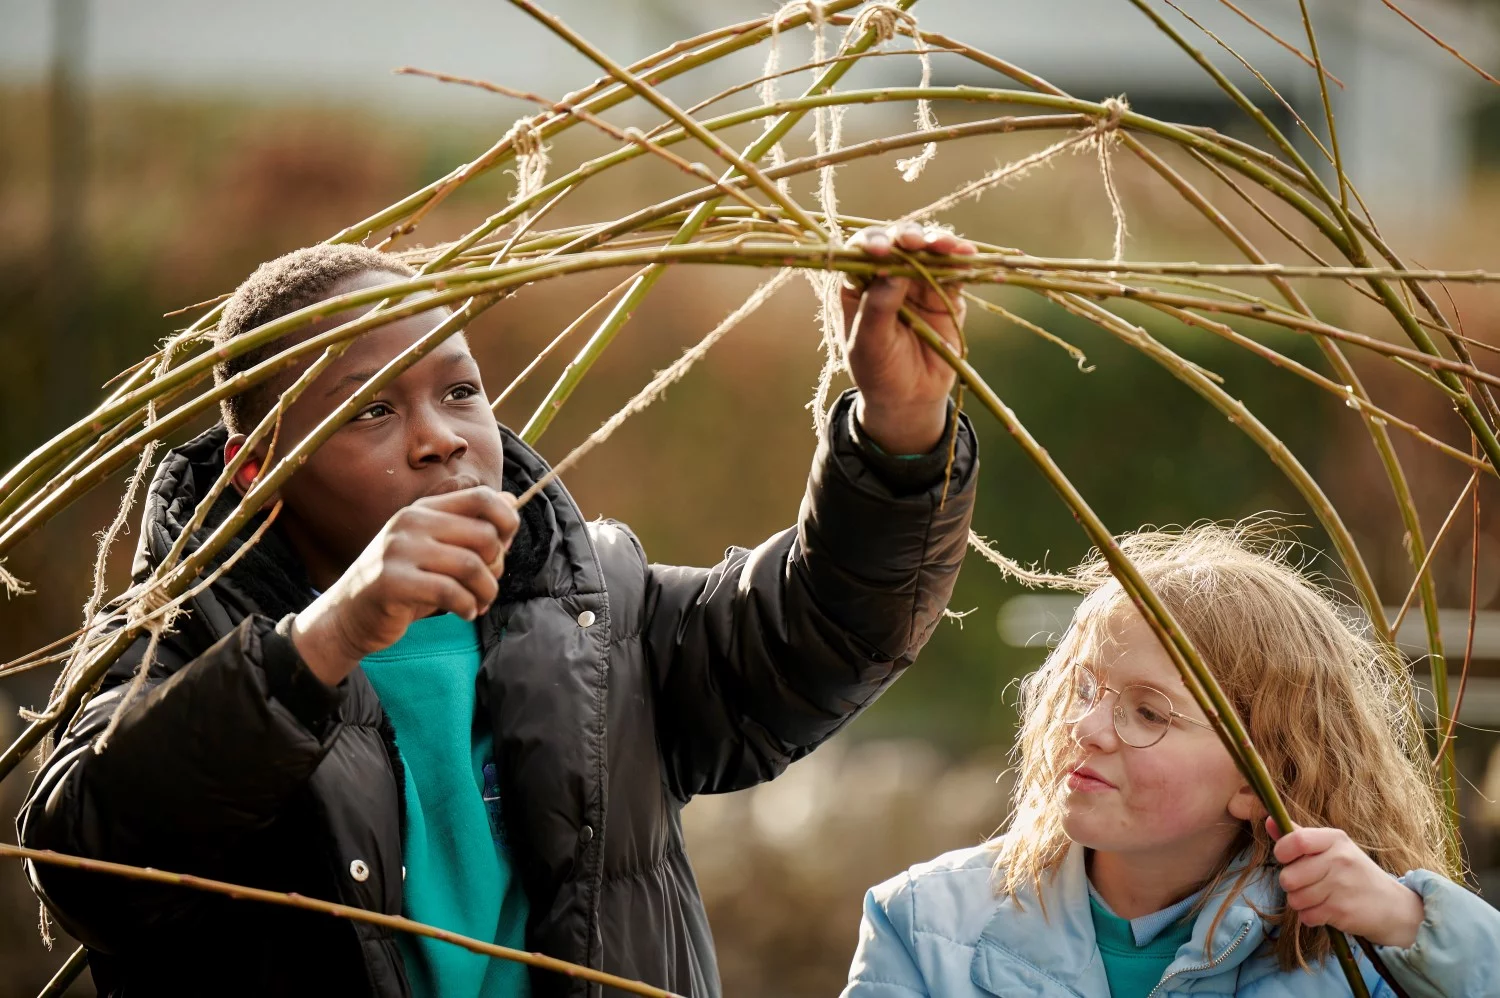 Children building a willow structure for plants to climb in their climate ready school grounds.